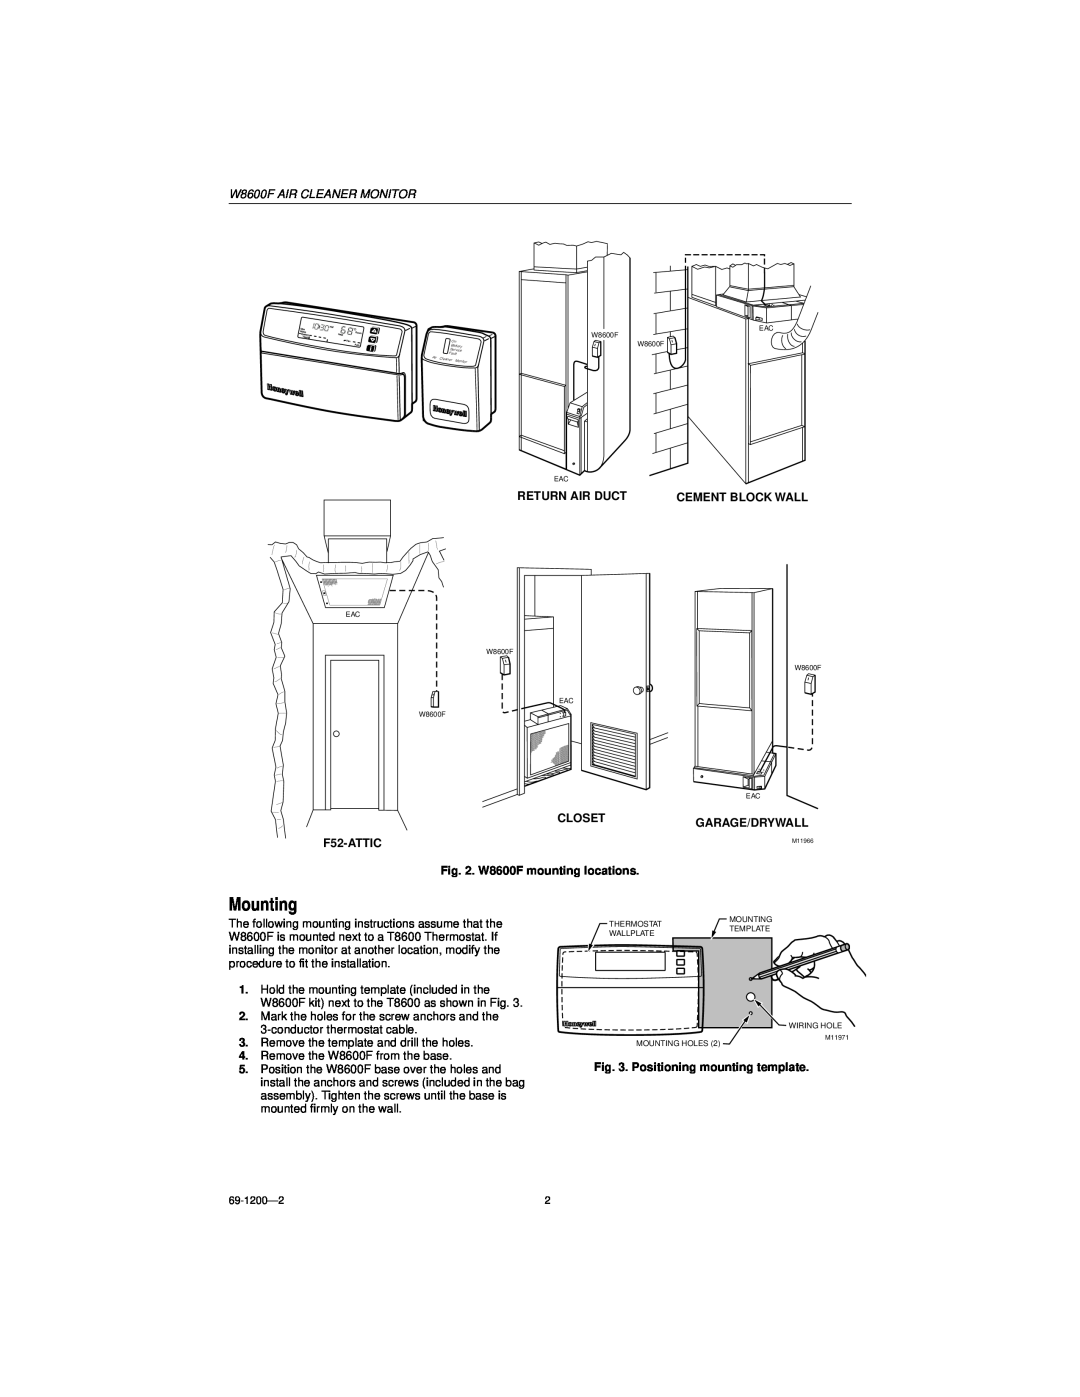 Honeywell installation instructions Mounting, W8600F AIR CLEANER MONITOR 